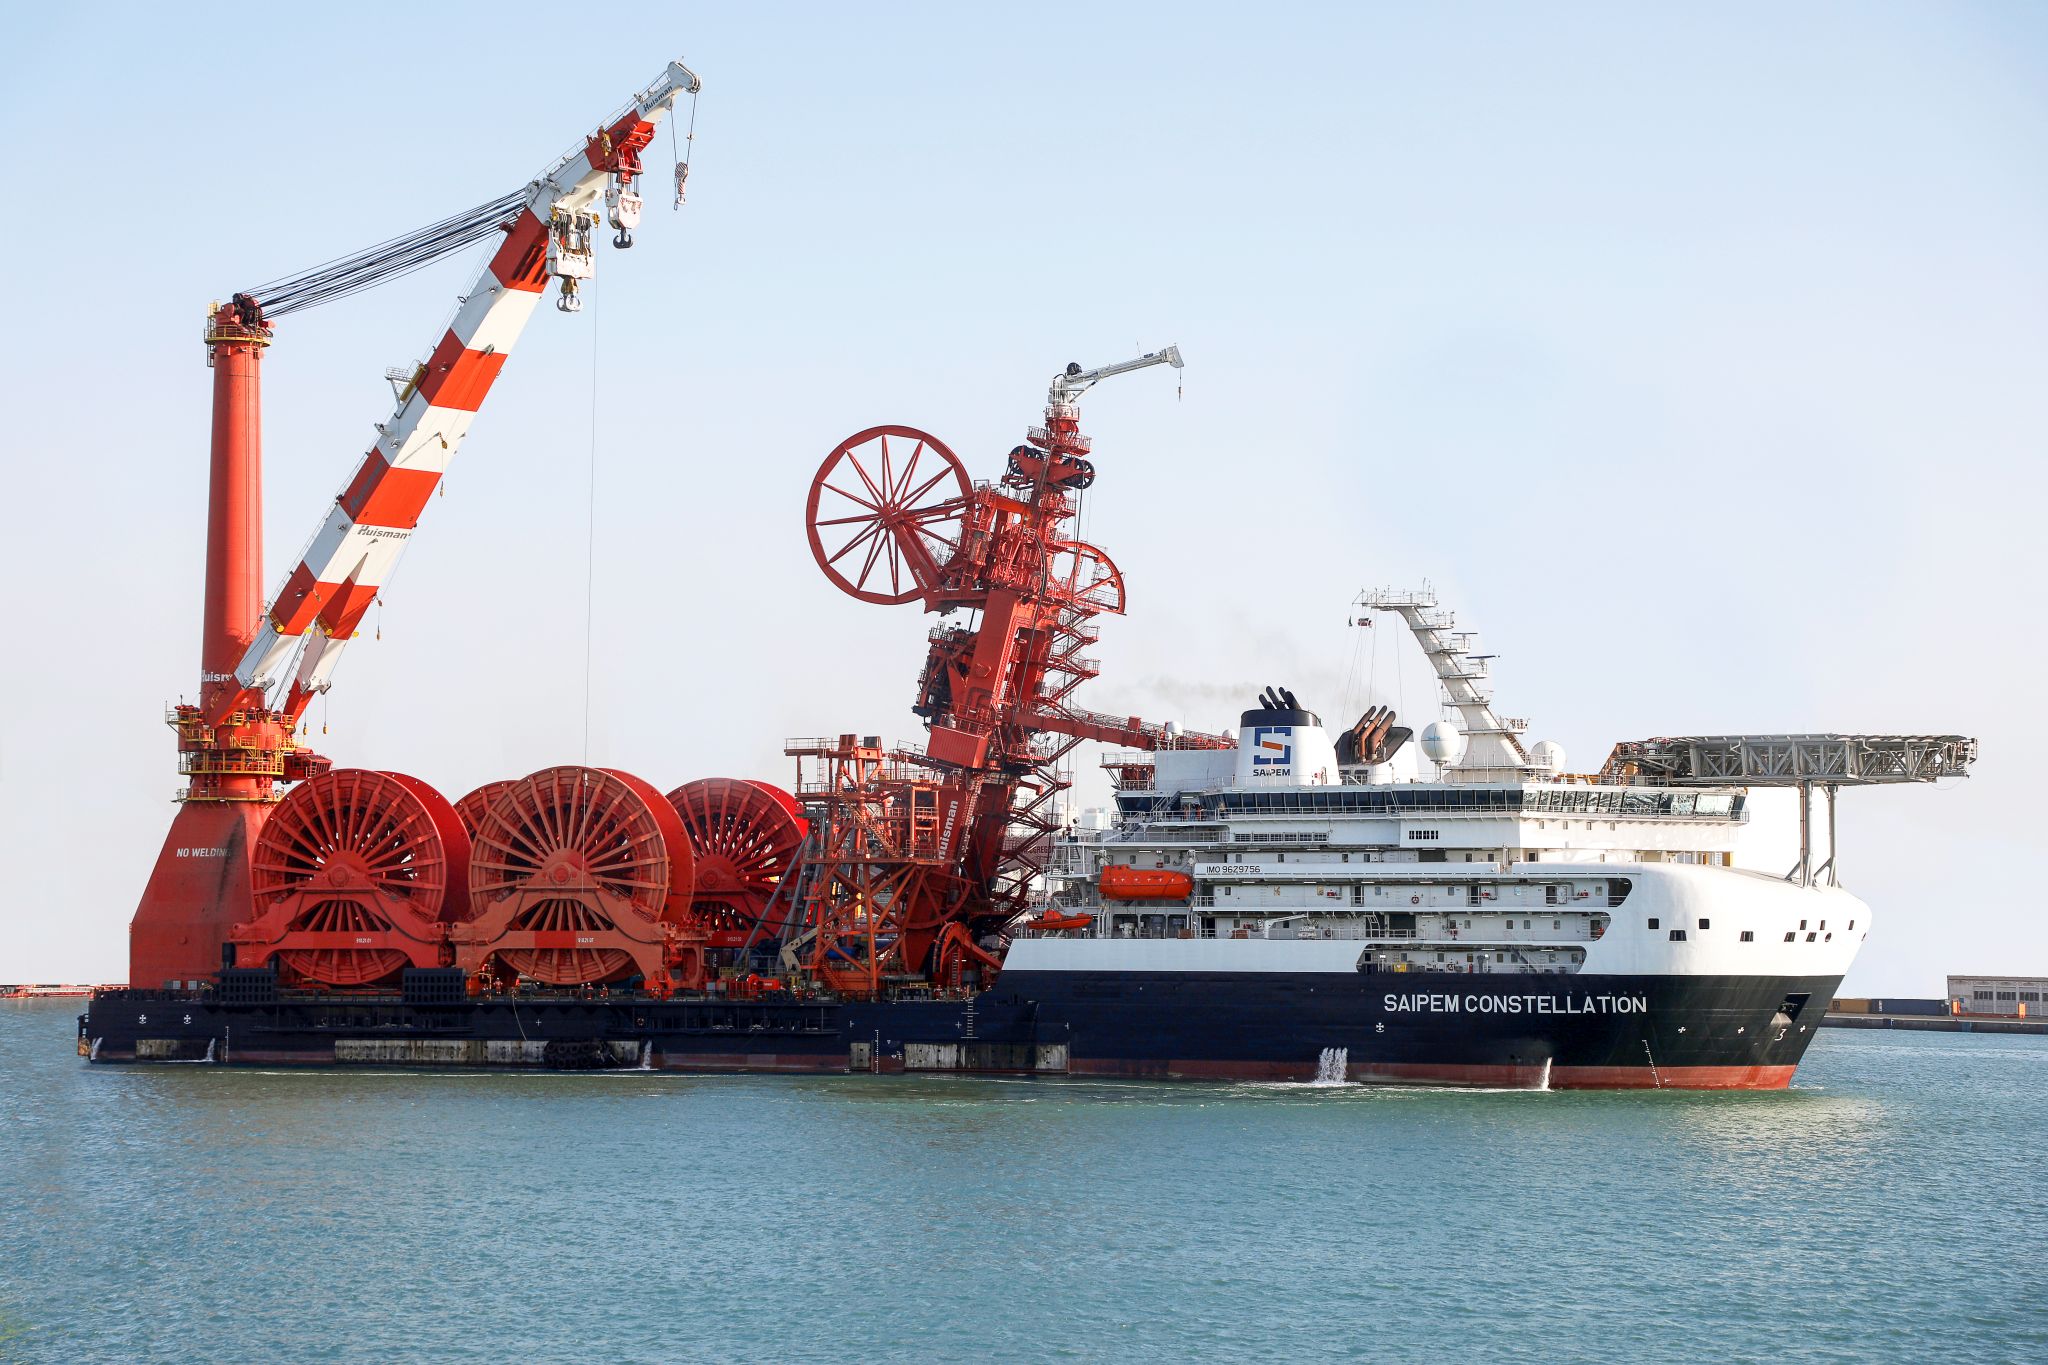 Saipem completes subsea production network for oilfield project offshore Angola